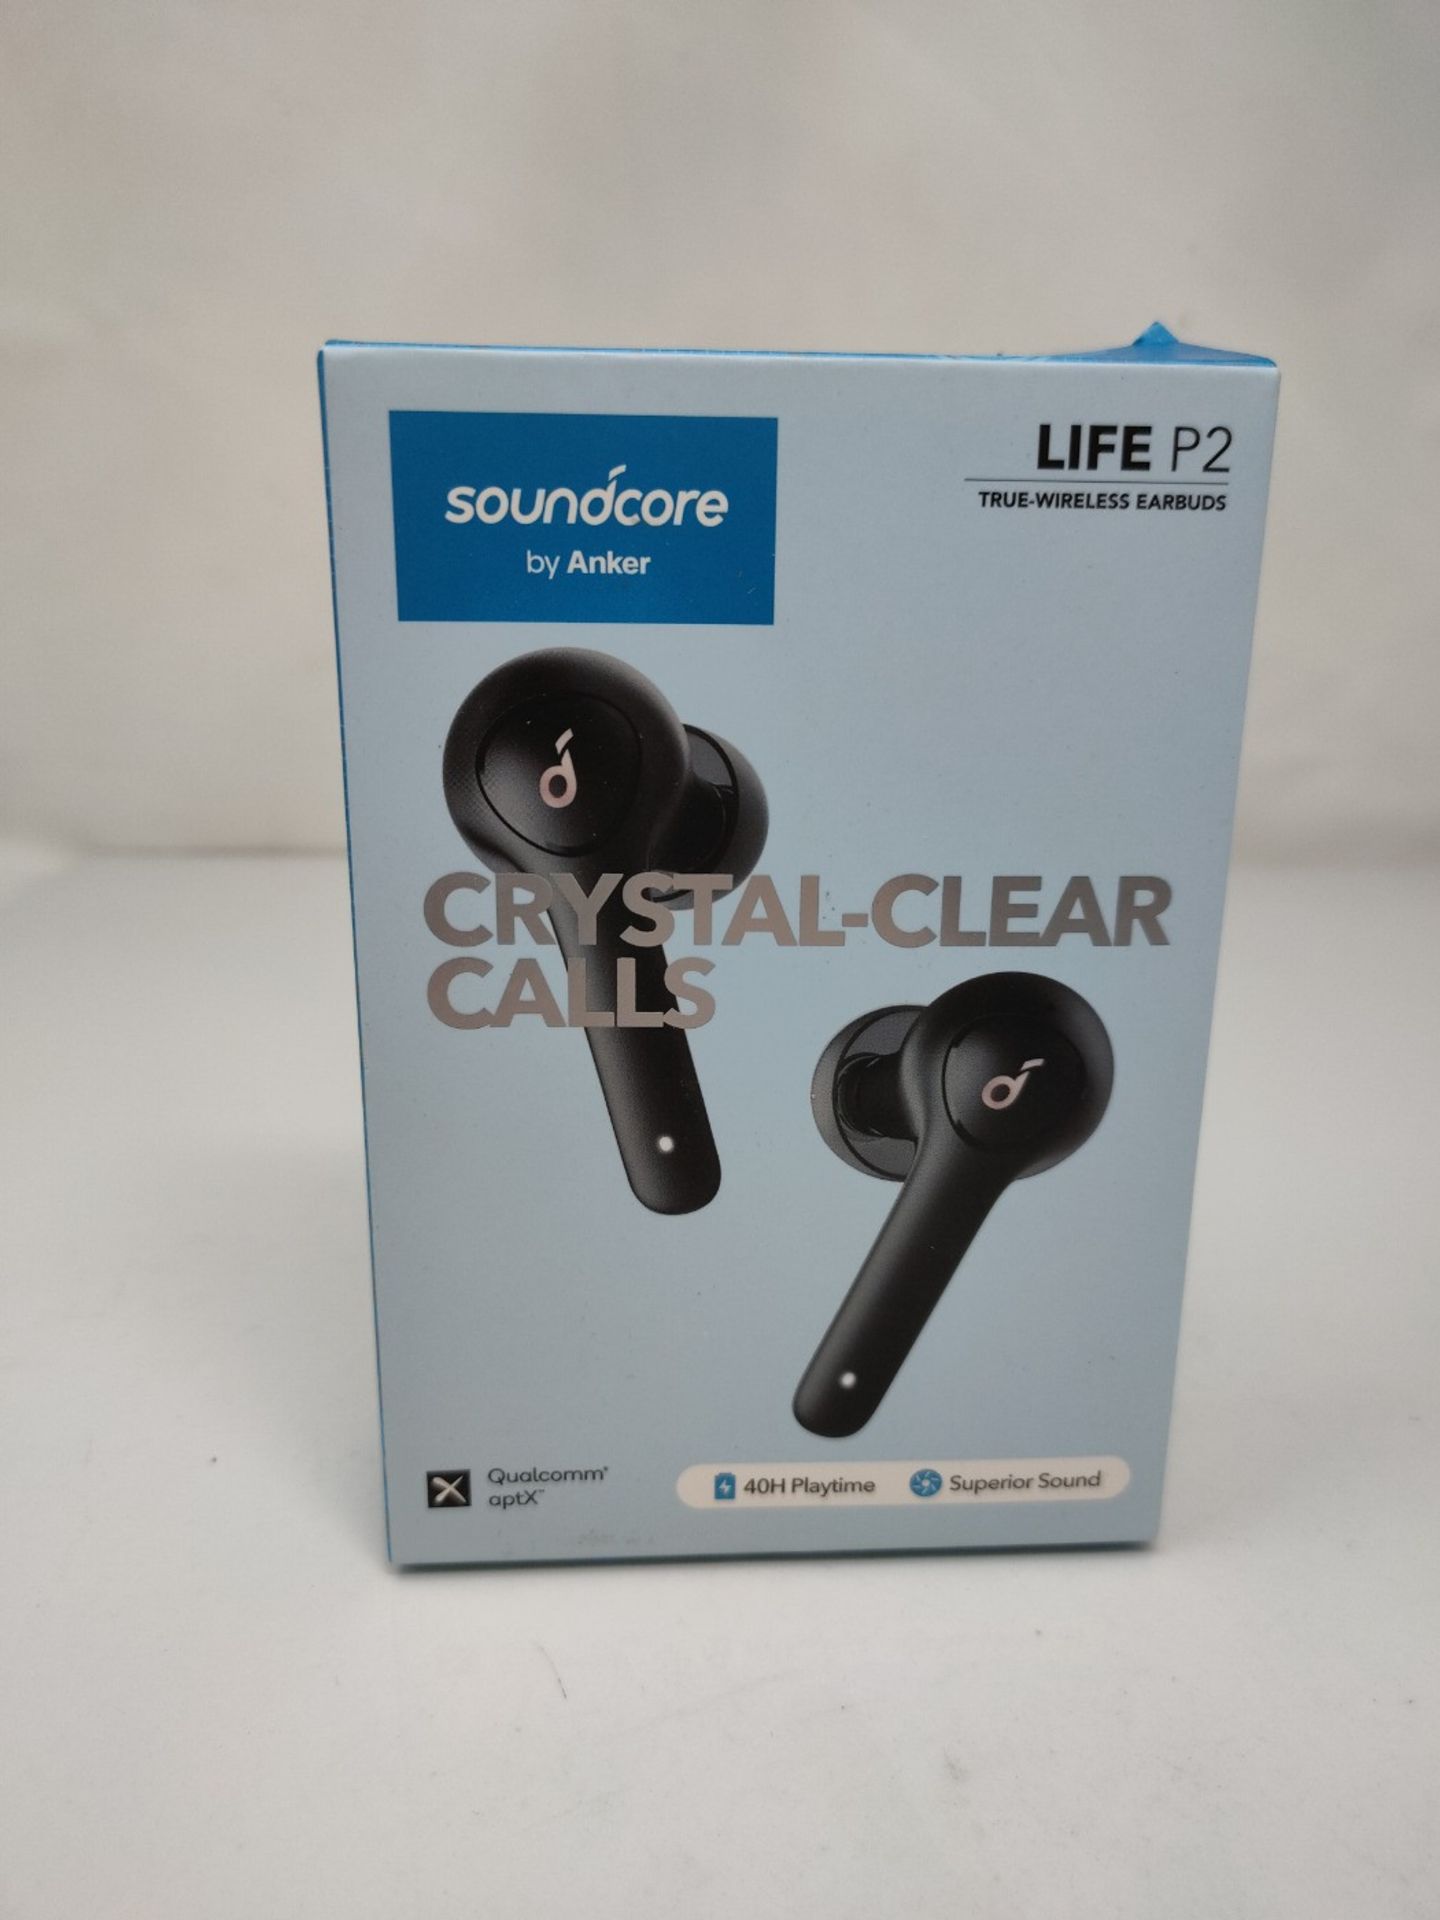 RRP £110.00 Soundcore Life P2 Bluetooth headphones, wireless earbuds CVC 8.0 noise isolation, crys - Image 2 of 3